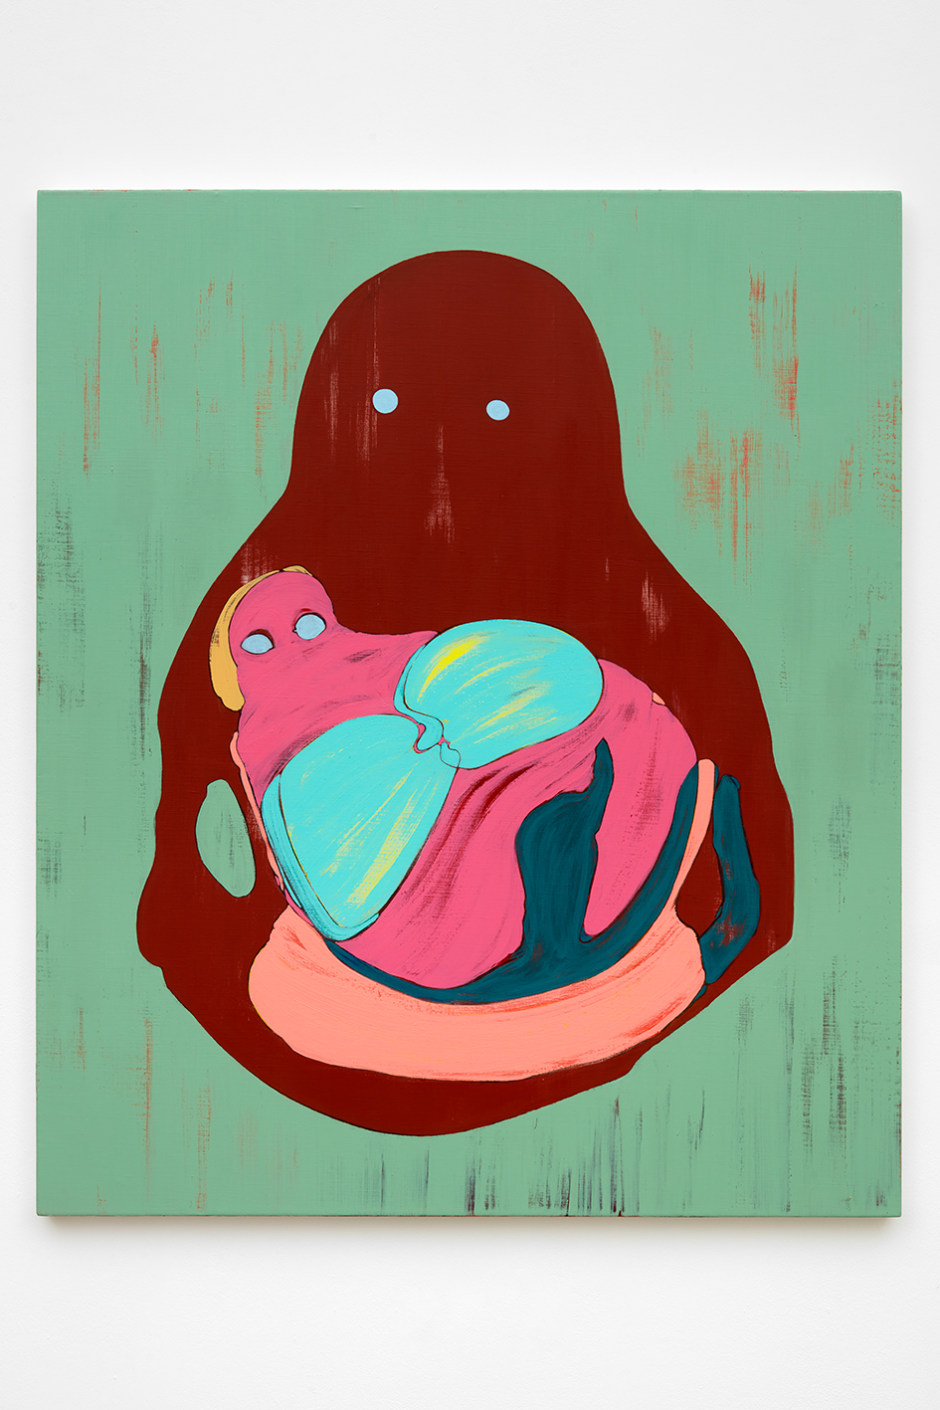 Nicola Tyson  Mother and baby, 2021  acrylic on linen  138.2 x 114.9 x 3.8 cm 54 ⅜ x 45 ¼ x 1 ½ in  Mother and baby, 2021 by Nicola Tyson sees a ghostly, plum coloured figure cradling a pink infant with bright blue paws, set against a background awash with mint green and vibrant hues. The affectionate scene suggests an interior state as much as a physical one, conveying the idea of ‘embodied experience’ – that is, experience relative to the individual body. Through a combination of hard-edged colour and ambivalent form, she evokes the interplay of perception, thought and feeling that characterises such experience.  Tyson is best known for reimagining of the female figure in relation to concepts of identity and the social gaze, sets out to describe the female body as a lived experienced, rather than merely observed. Moving beyond a mimetic, objectifying approach, she explores the body as a constantly shifting set of felt coordinates.  Tyson’s art draws upon, and grapples with, that of artistic forbears as diverse as Maria Lassnig, Hans Bellmer and Pablo Picasso. (Her 2013 book Dead Letter Men verbalises this mode of combative engagement, in a series of missives to deceased male artists). Her practice has its roots in a 1990s moment when, as she has recalled, painting was considered “at best conservative and probably redundant,” and yet she continues to assert the vitality of her medium from a contrary feminist mindset.